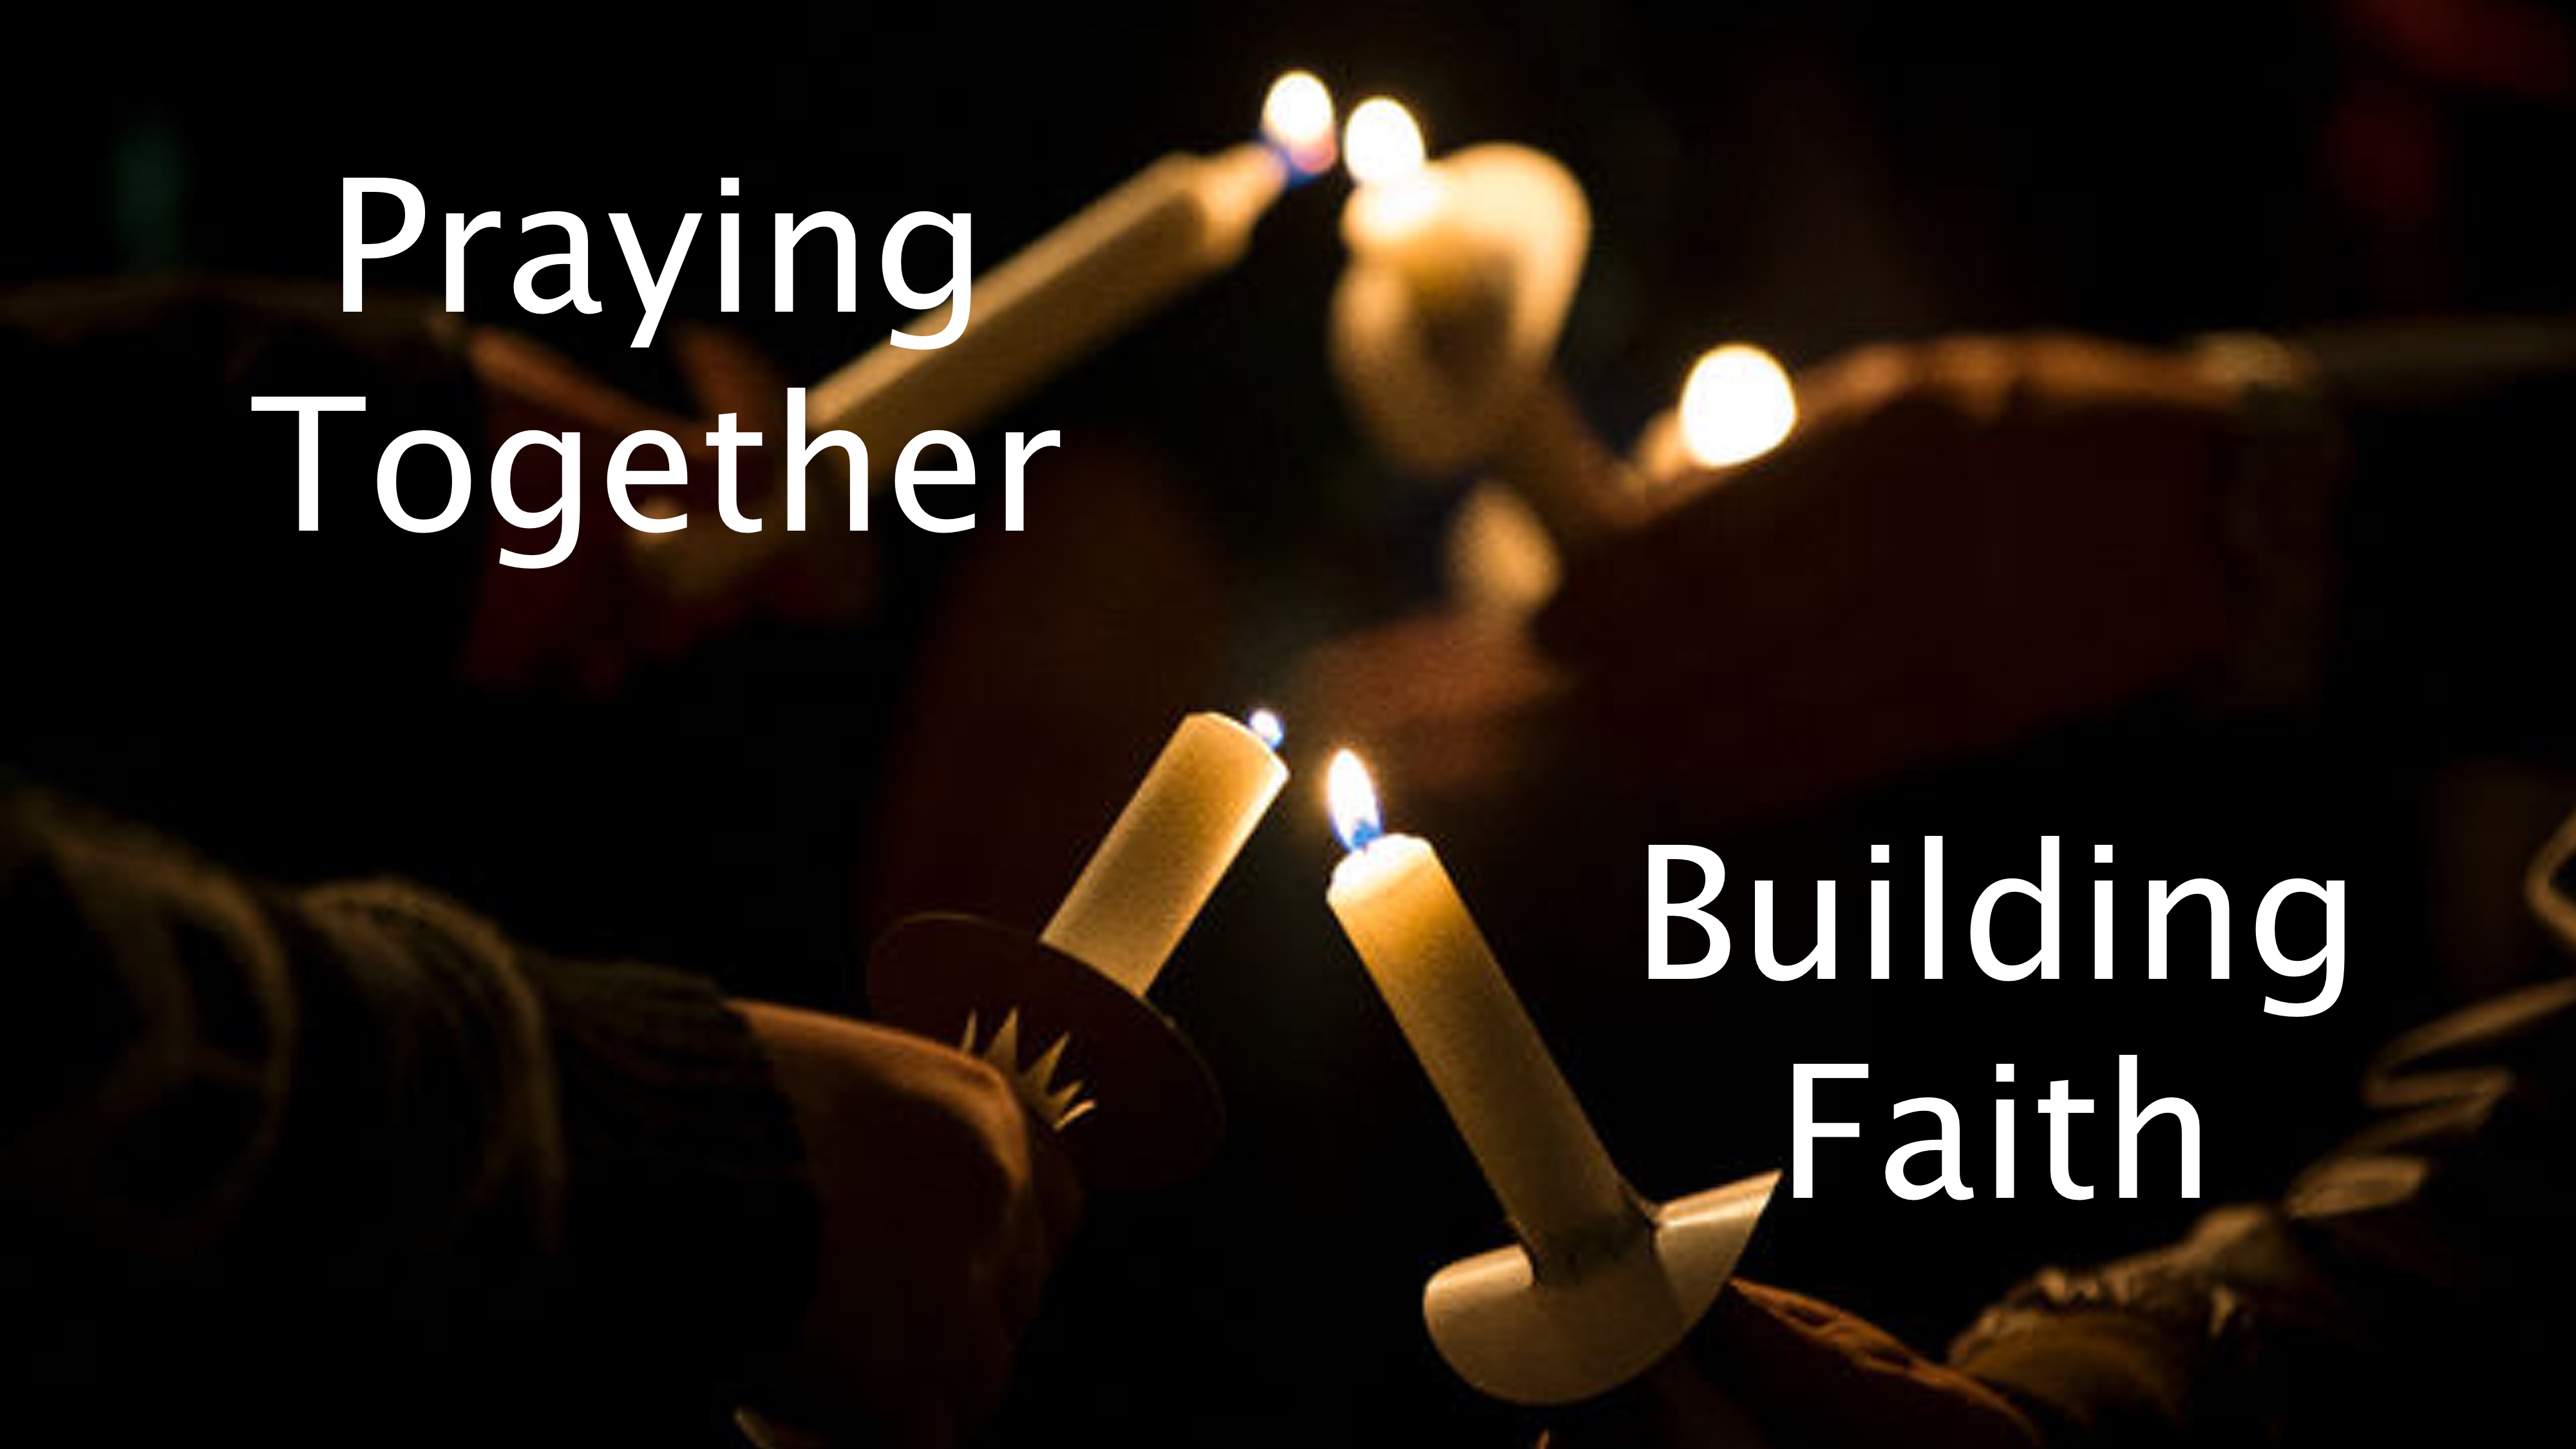 Praying Together, Building Faith